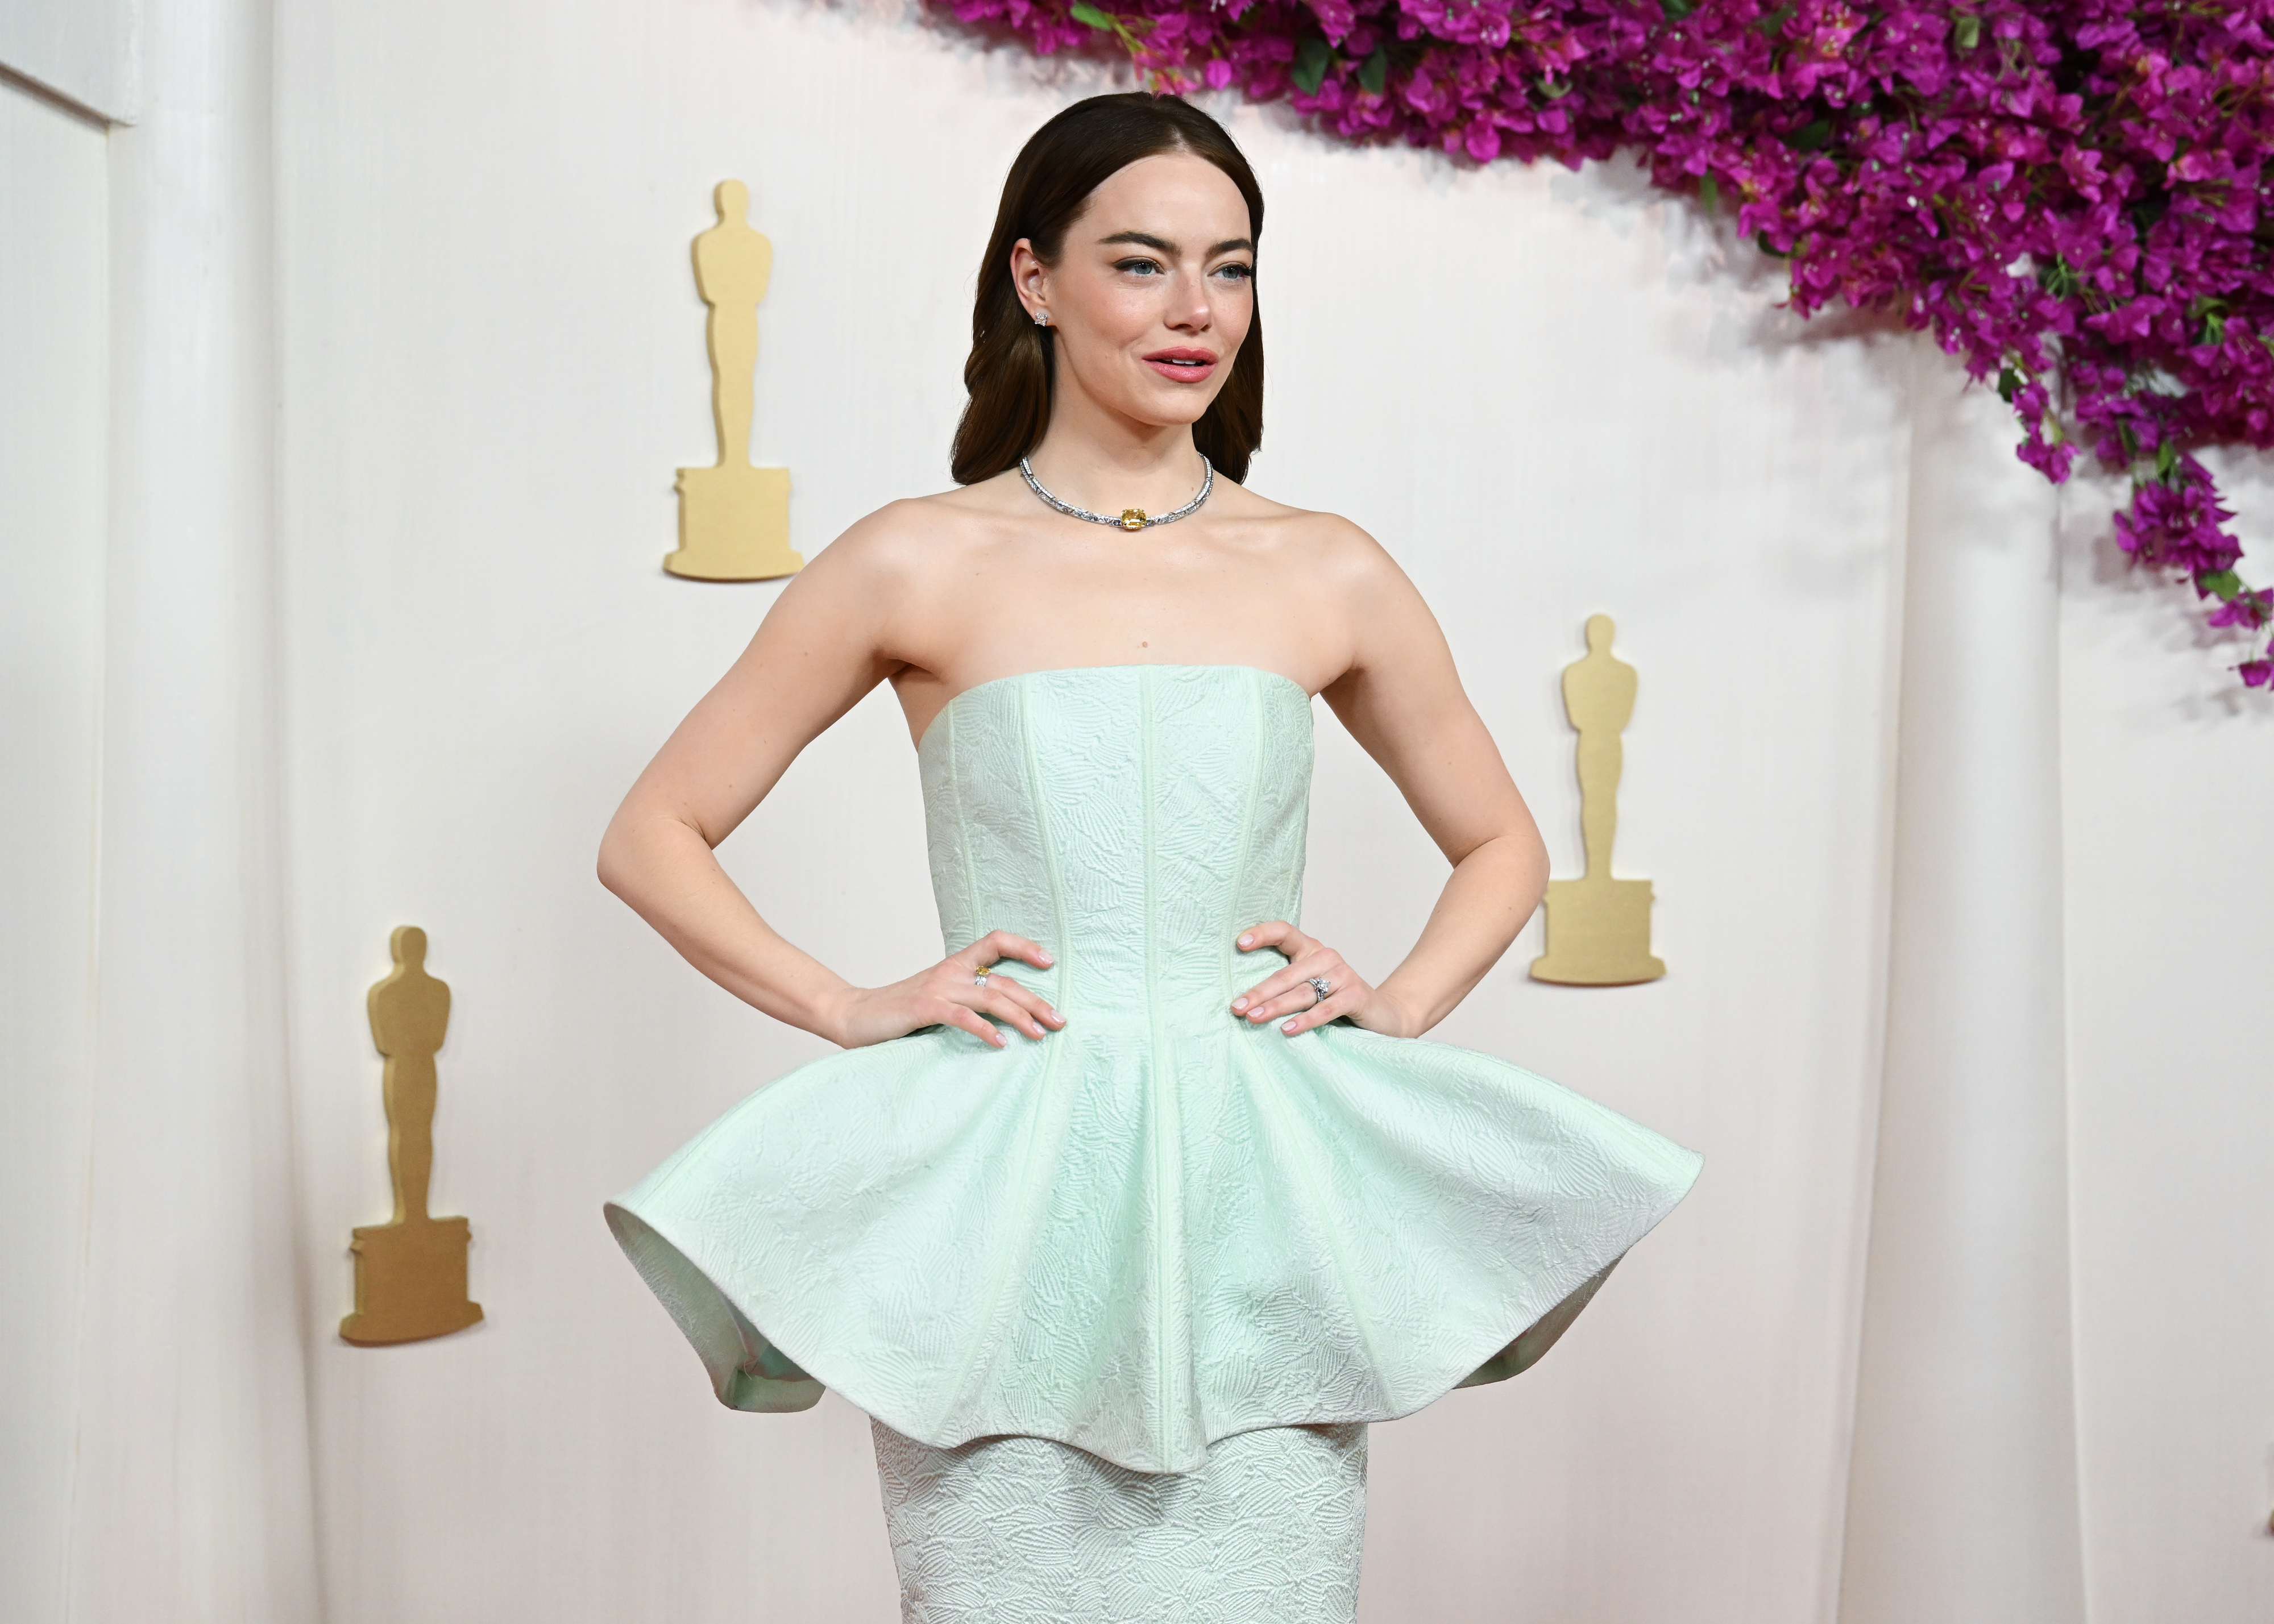 Emma Stone at the Oscars posing on the red carpet with her hands on her hips